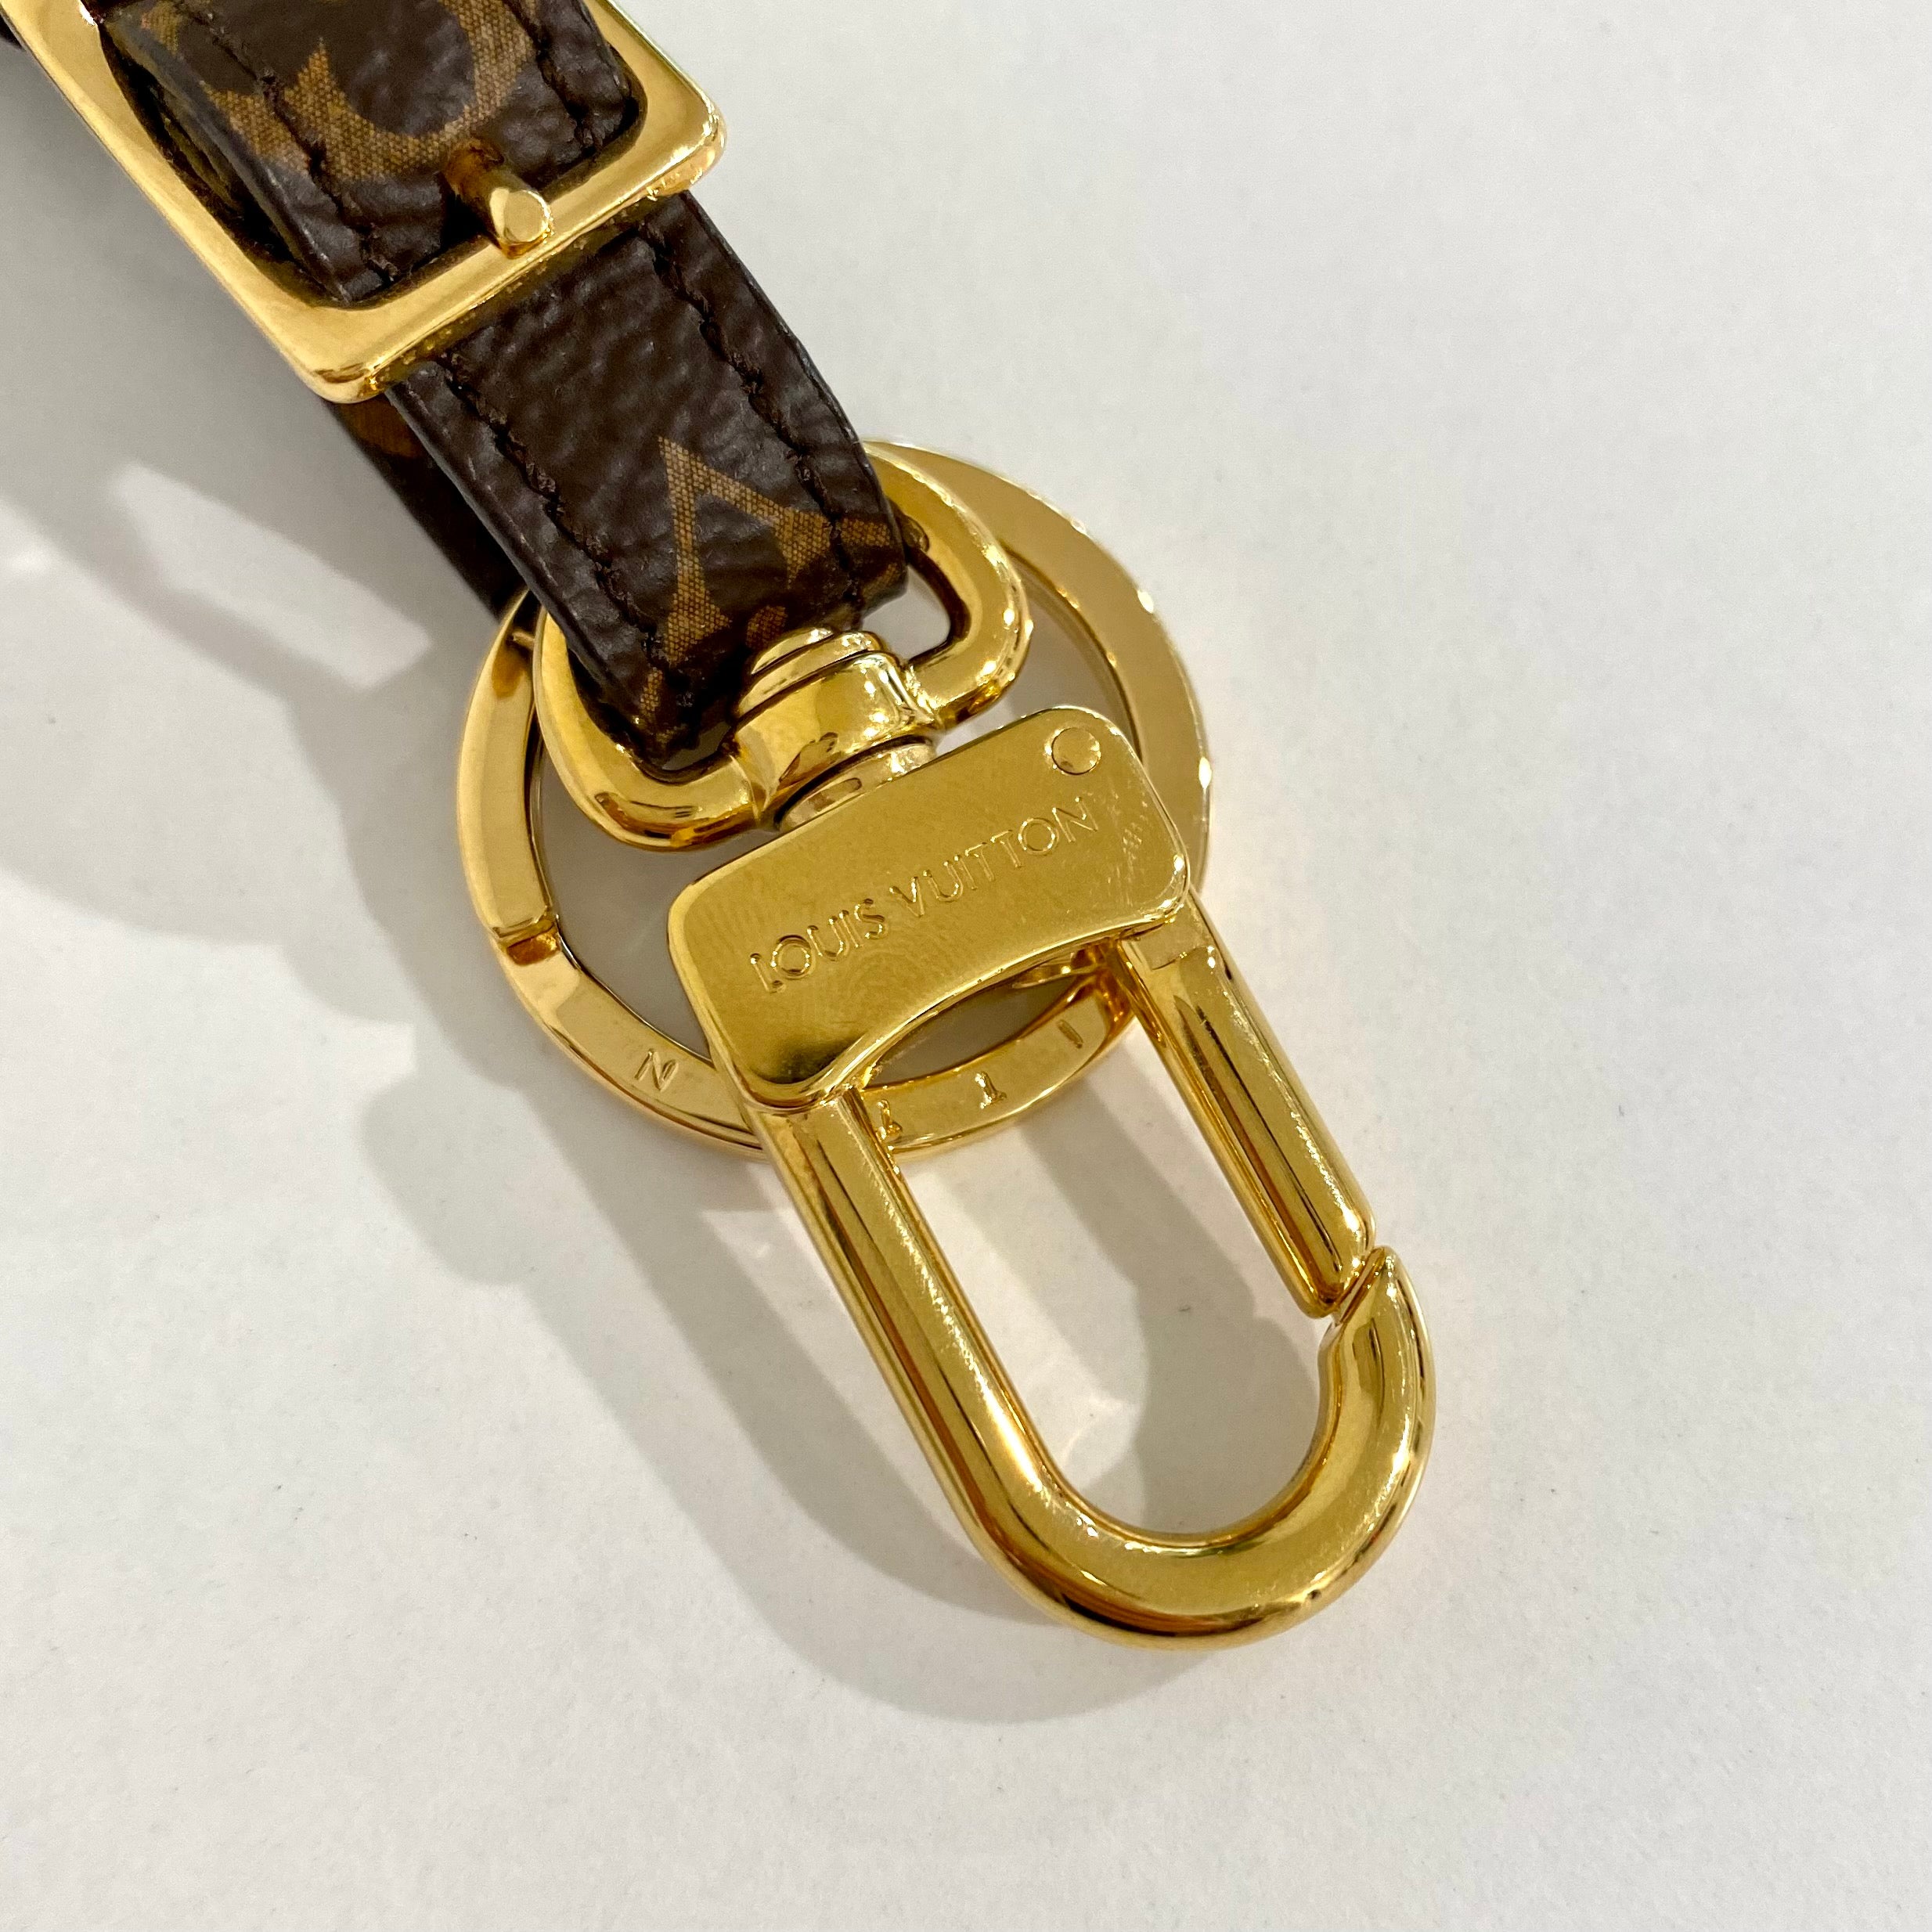 Leather bag charm Louis Vuitton Gold in Leather - 11931814